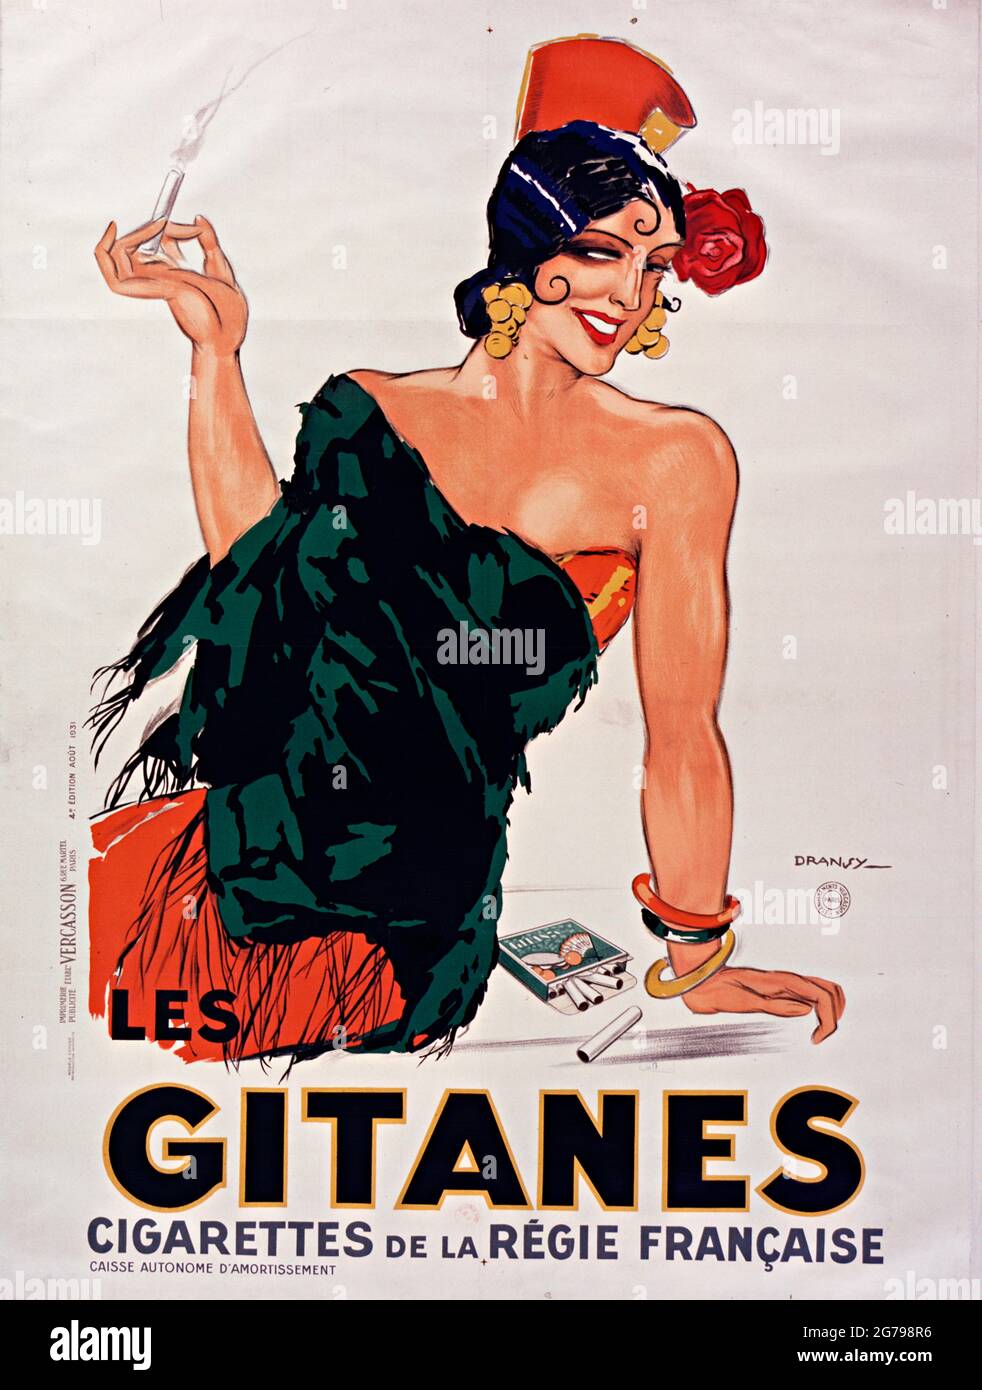 Cigarettes Gitanes. Museum: PRIVATE COLLECTION. Author: Jules Isnard Dransy. Stock Photo